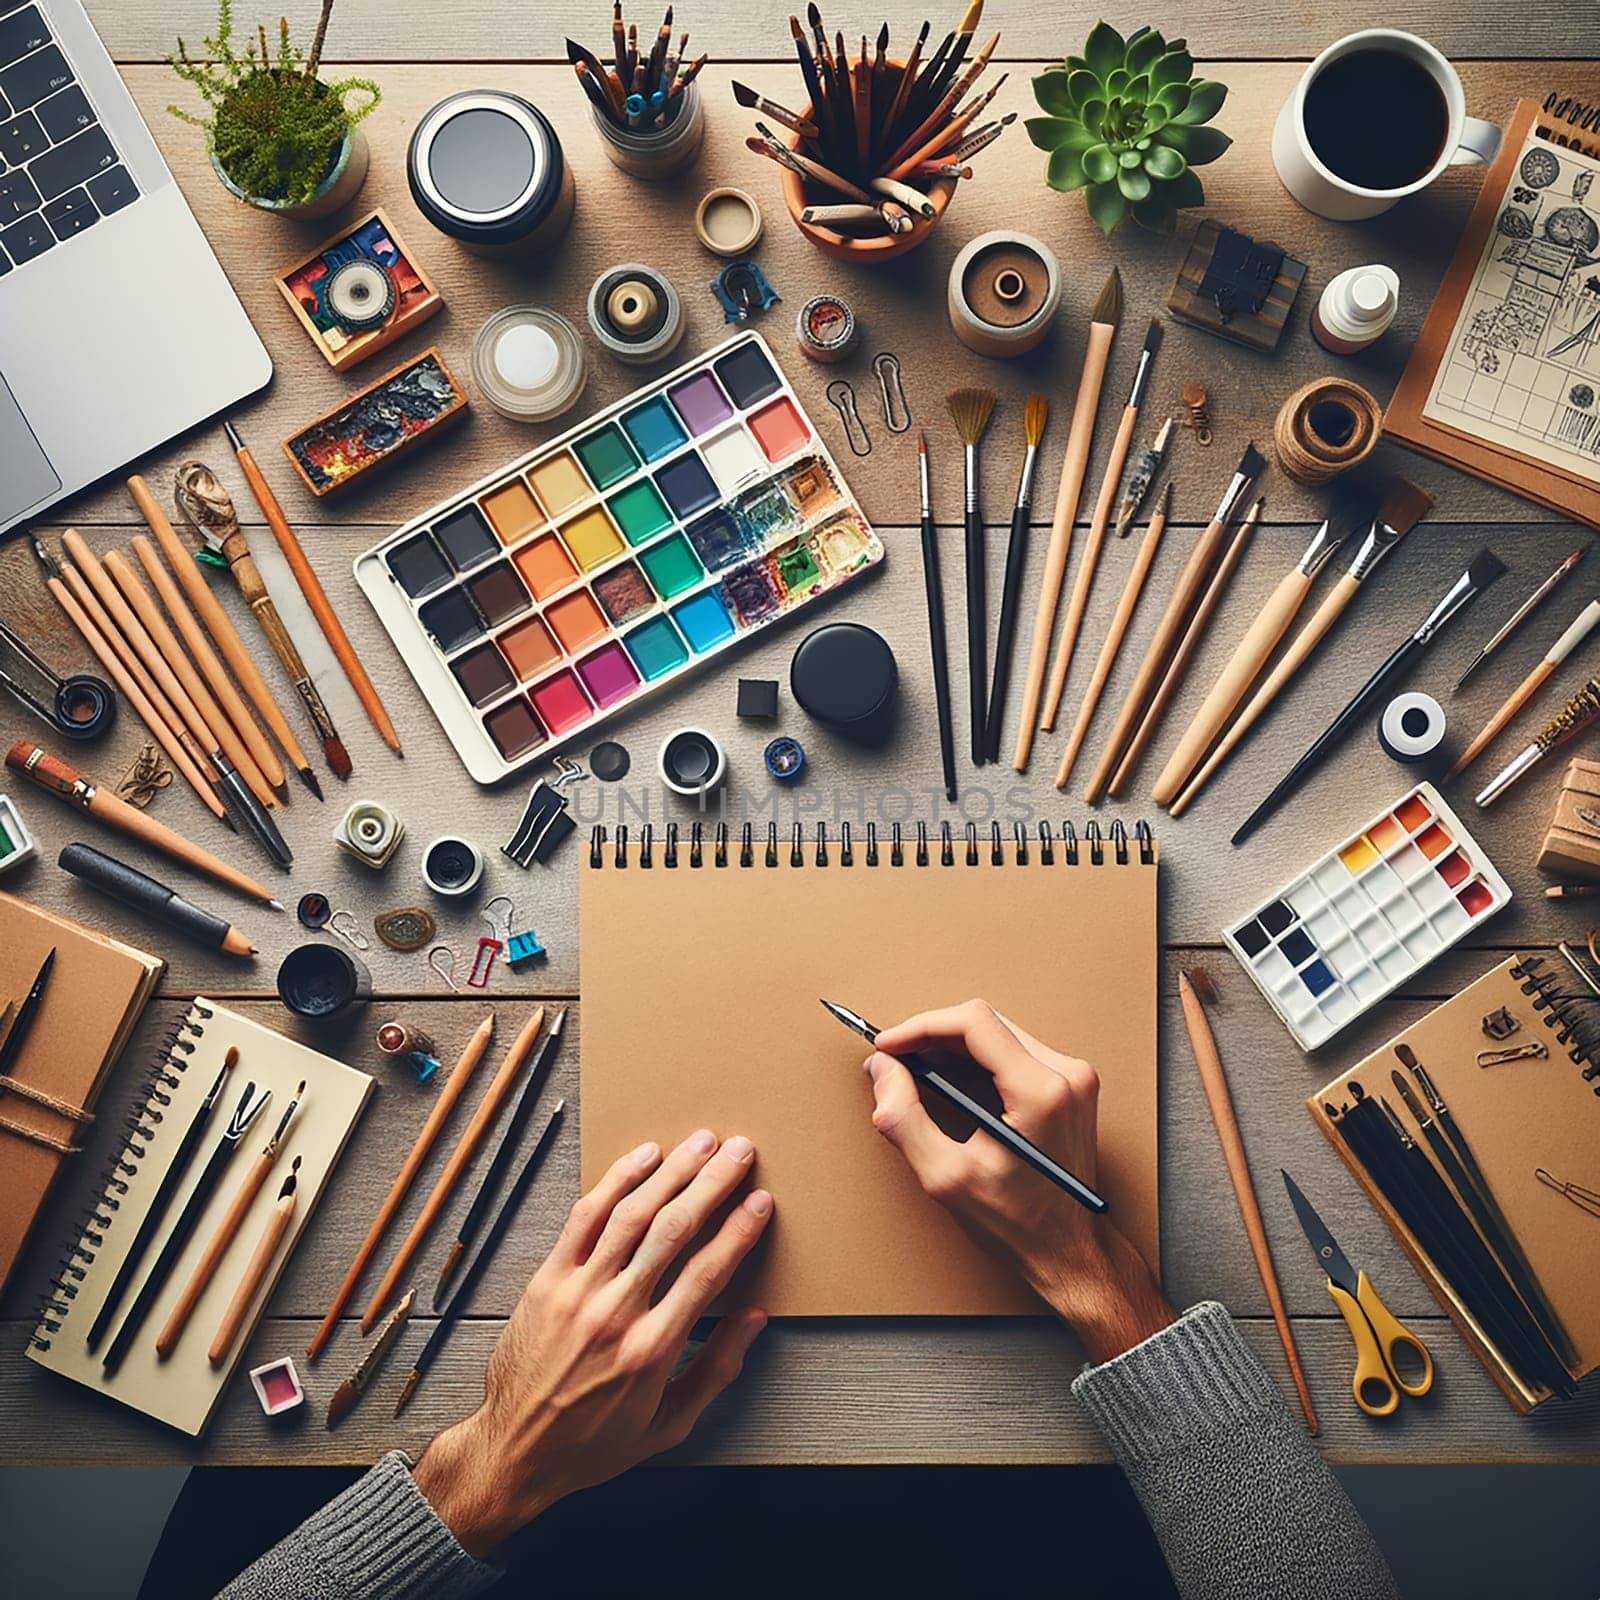 Artistic Haven: Crafting Creativity in a Desktop Workspace by Petrichor